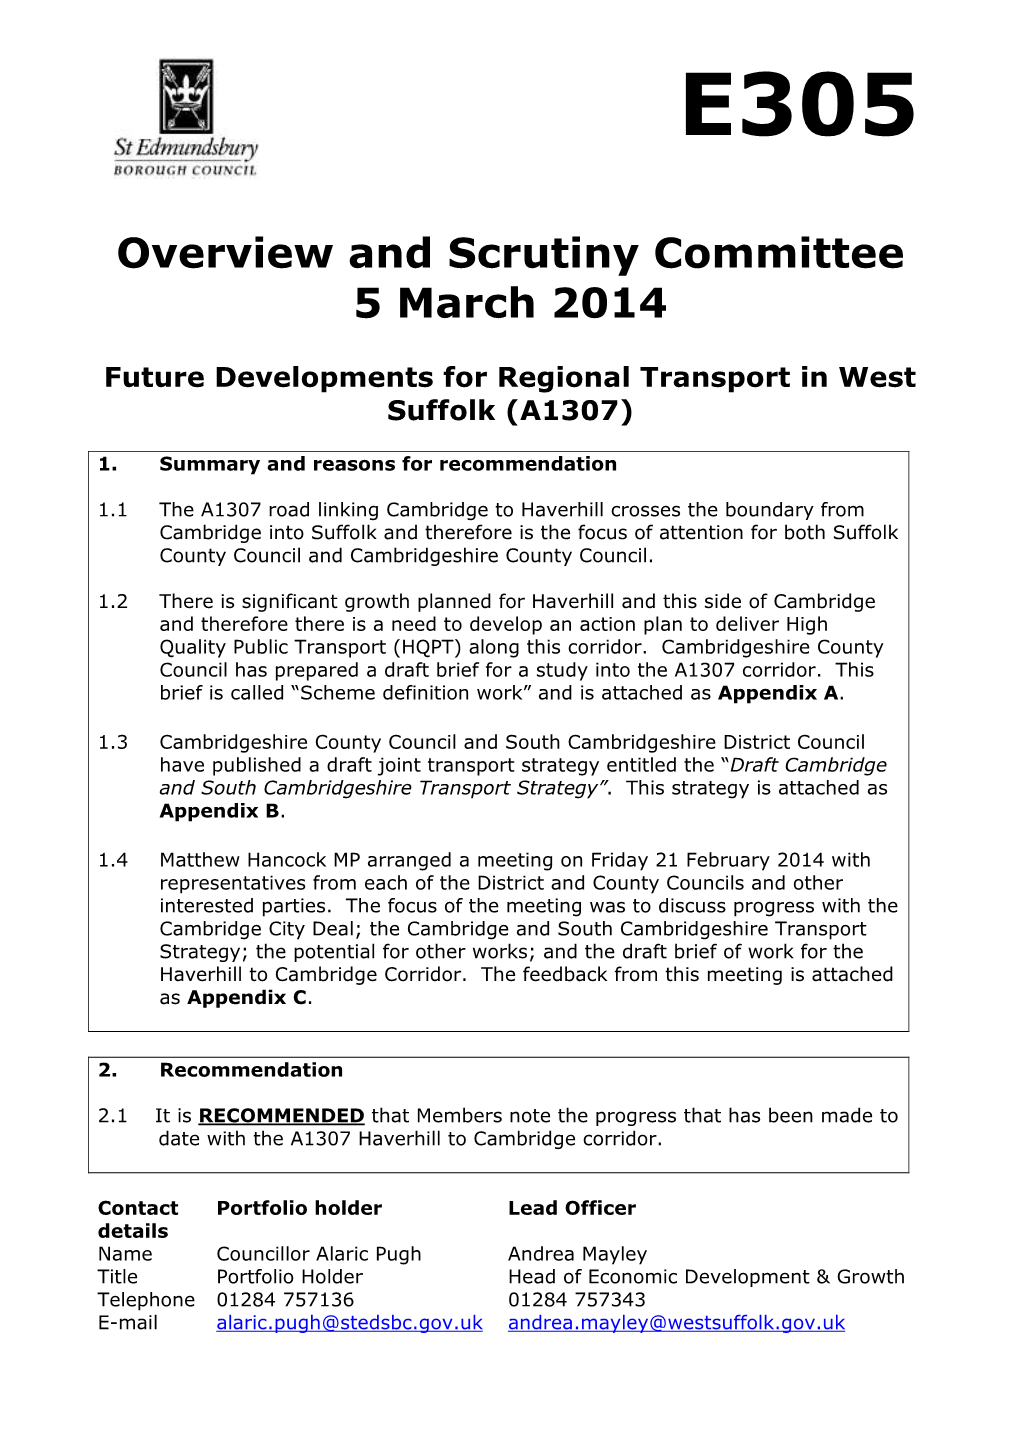 Overview and Scrutiny Committee 5 March 2014